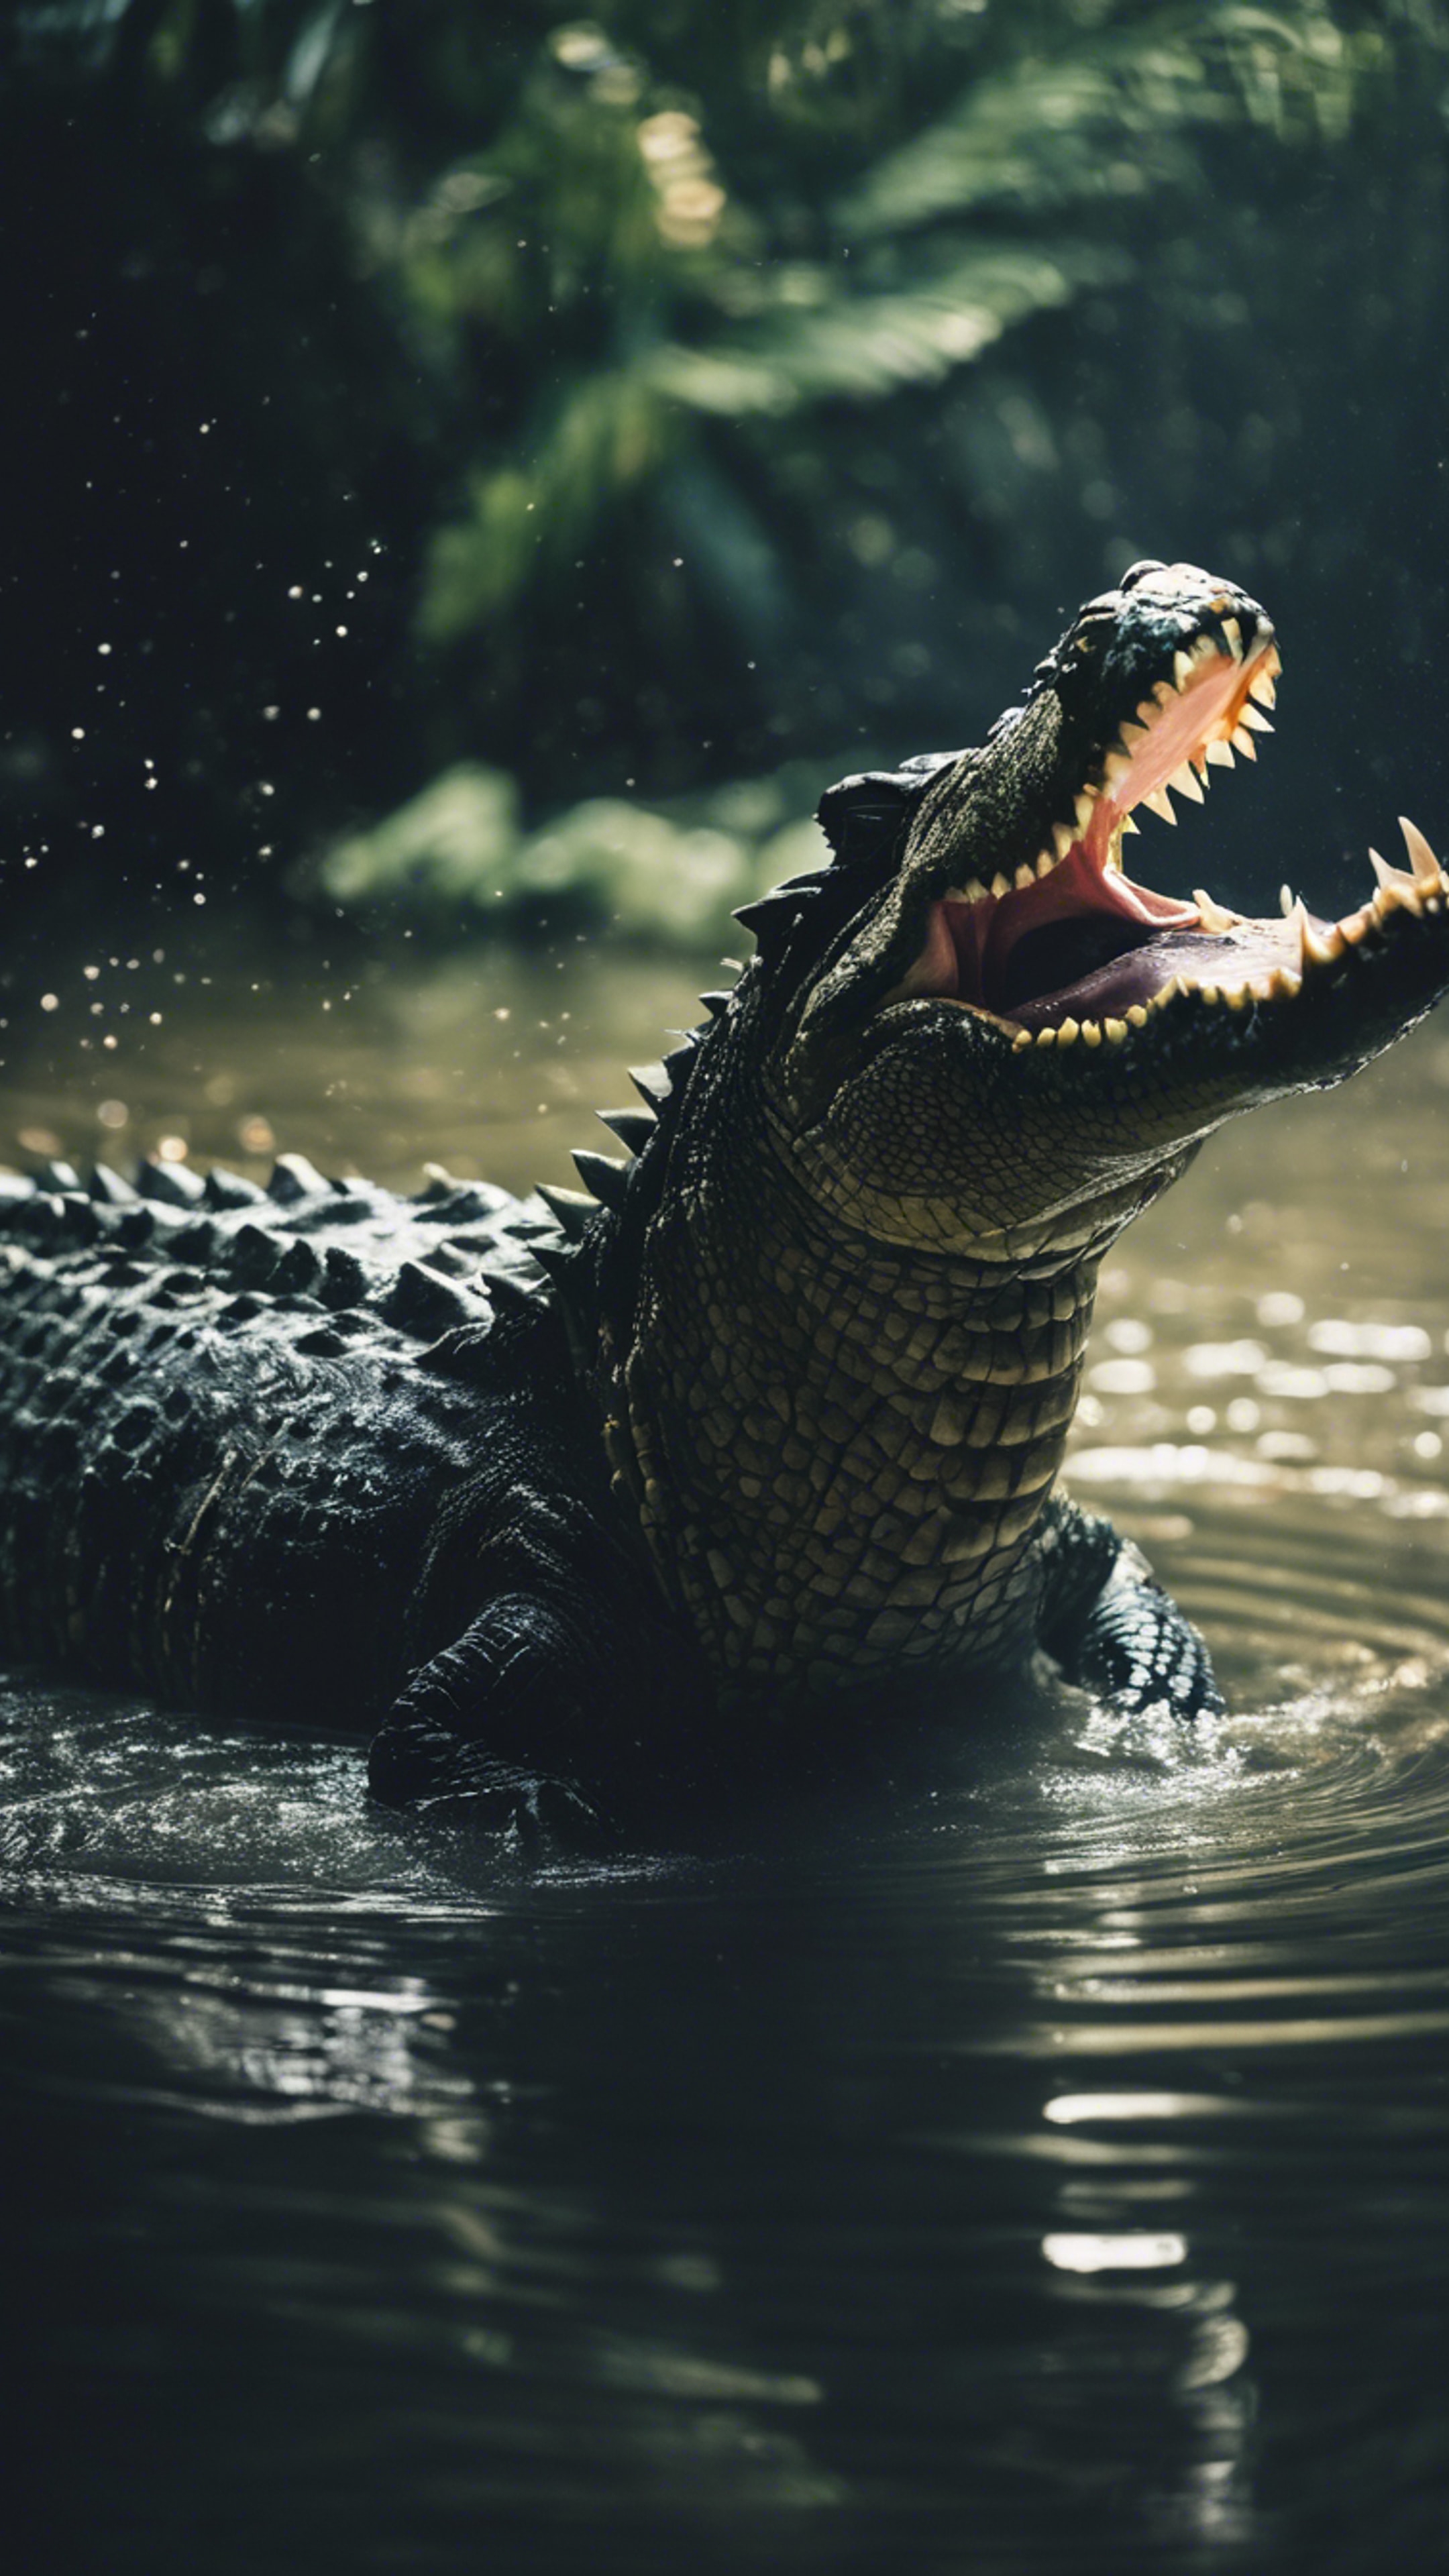 Two crocodiles engaging in a territorial battle in the middle of a dark lagoon. Tapeta[ccc66b55c2b3408d8928]